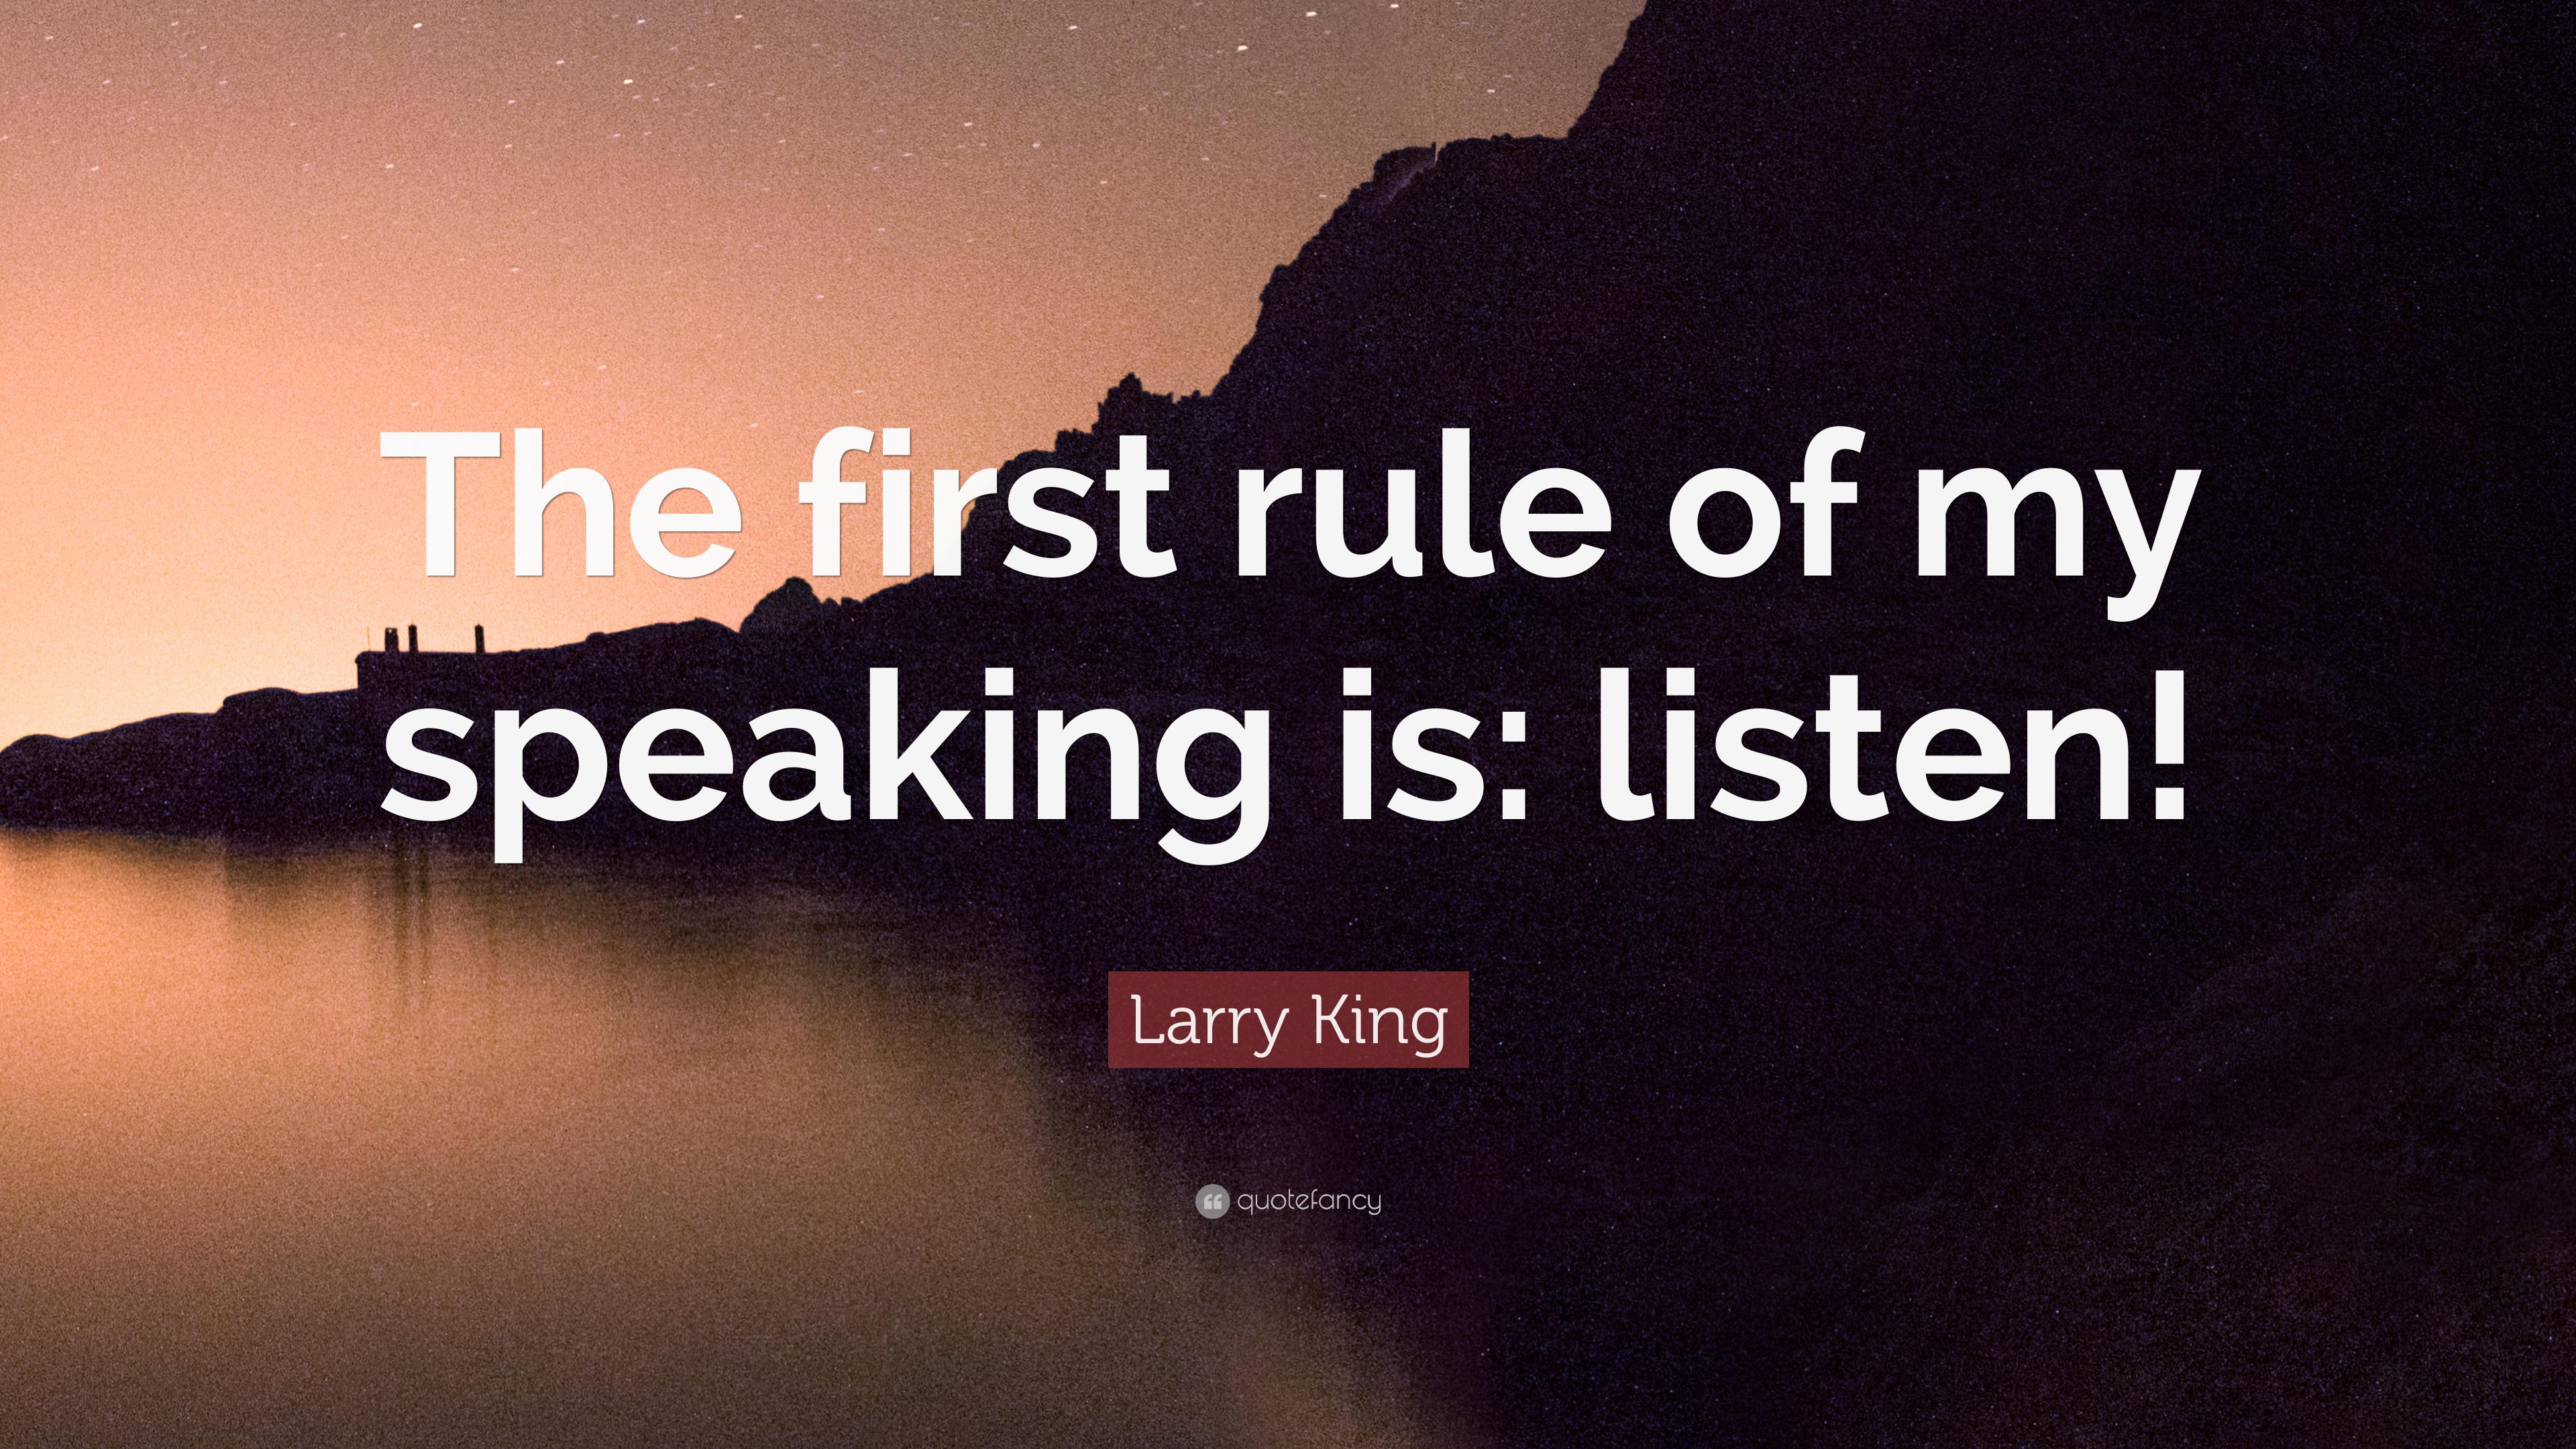 Larry King Quote: “The first rule of my speaking is: listen!” 9